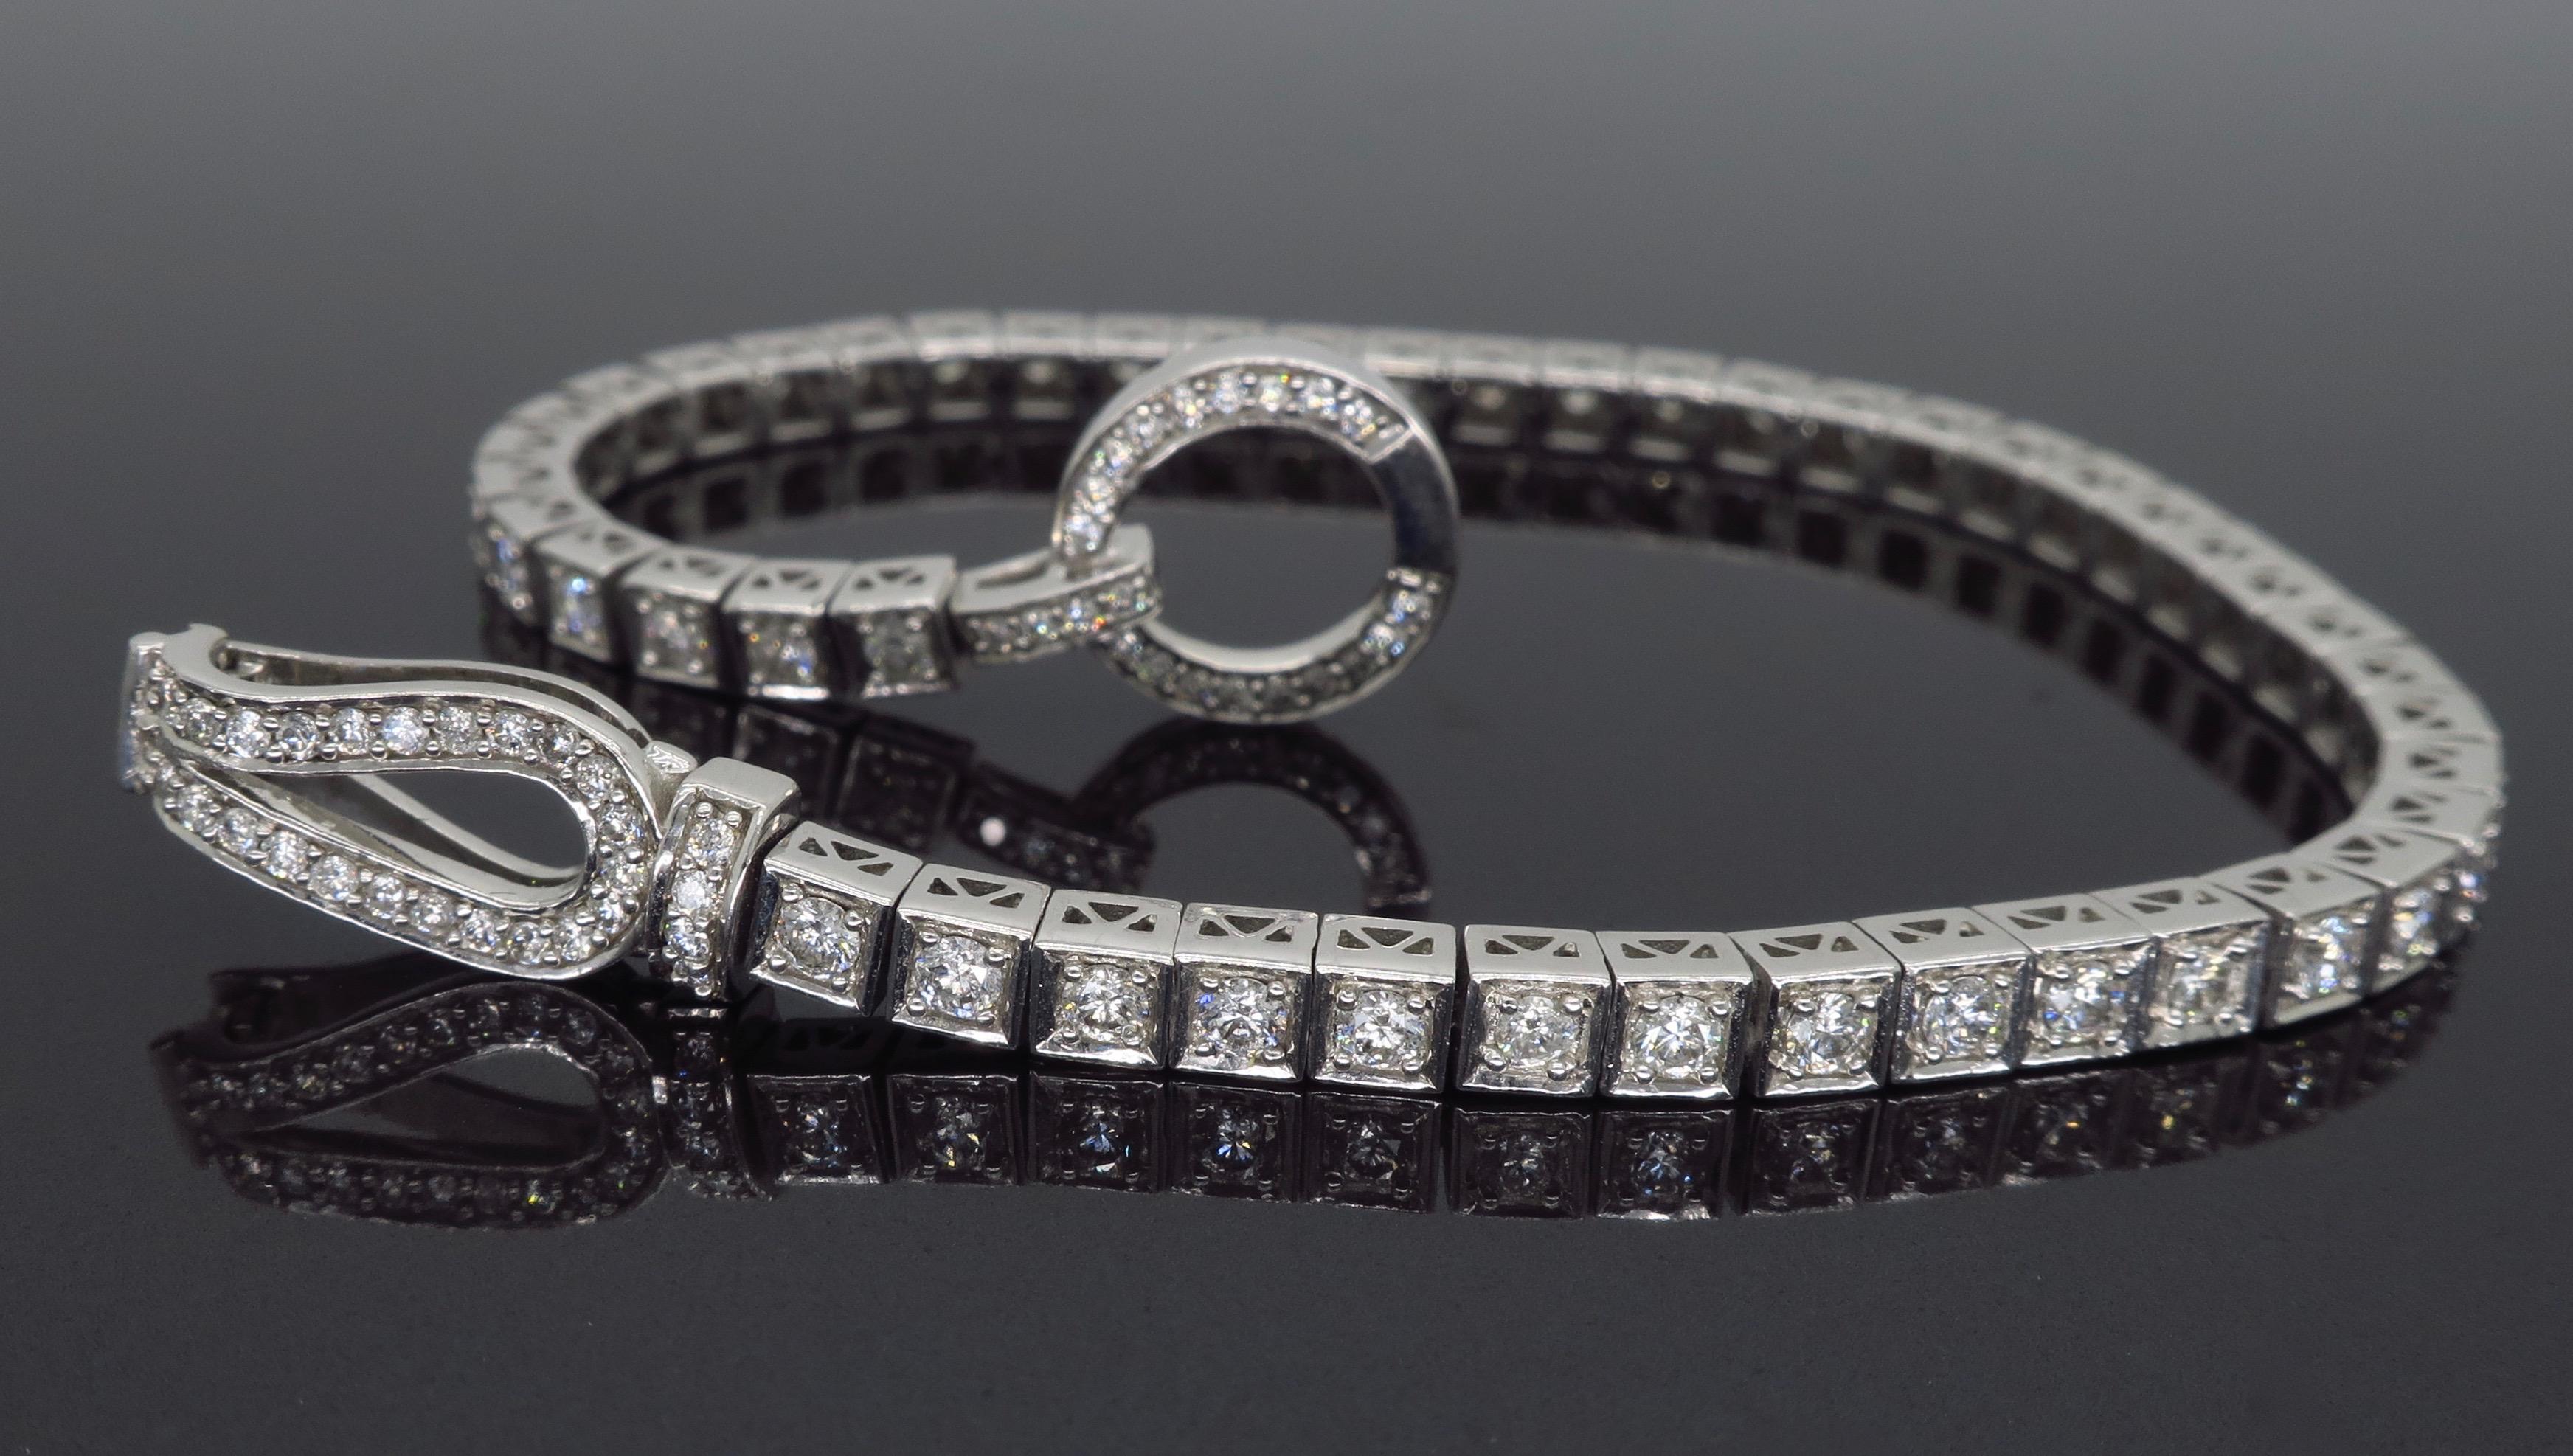 This stunning tennis bracelet features 96 Round Brilliant Cut Diamonds, set in 14K white gold with a unique clasp.

Diamond Carat Weight: Approximately 2.00CTW
Diamond Cut: 96 Round Brilliant Cut Diamonds
Color: Average G-I
Clarity: Average